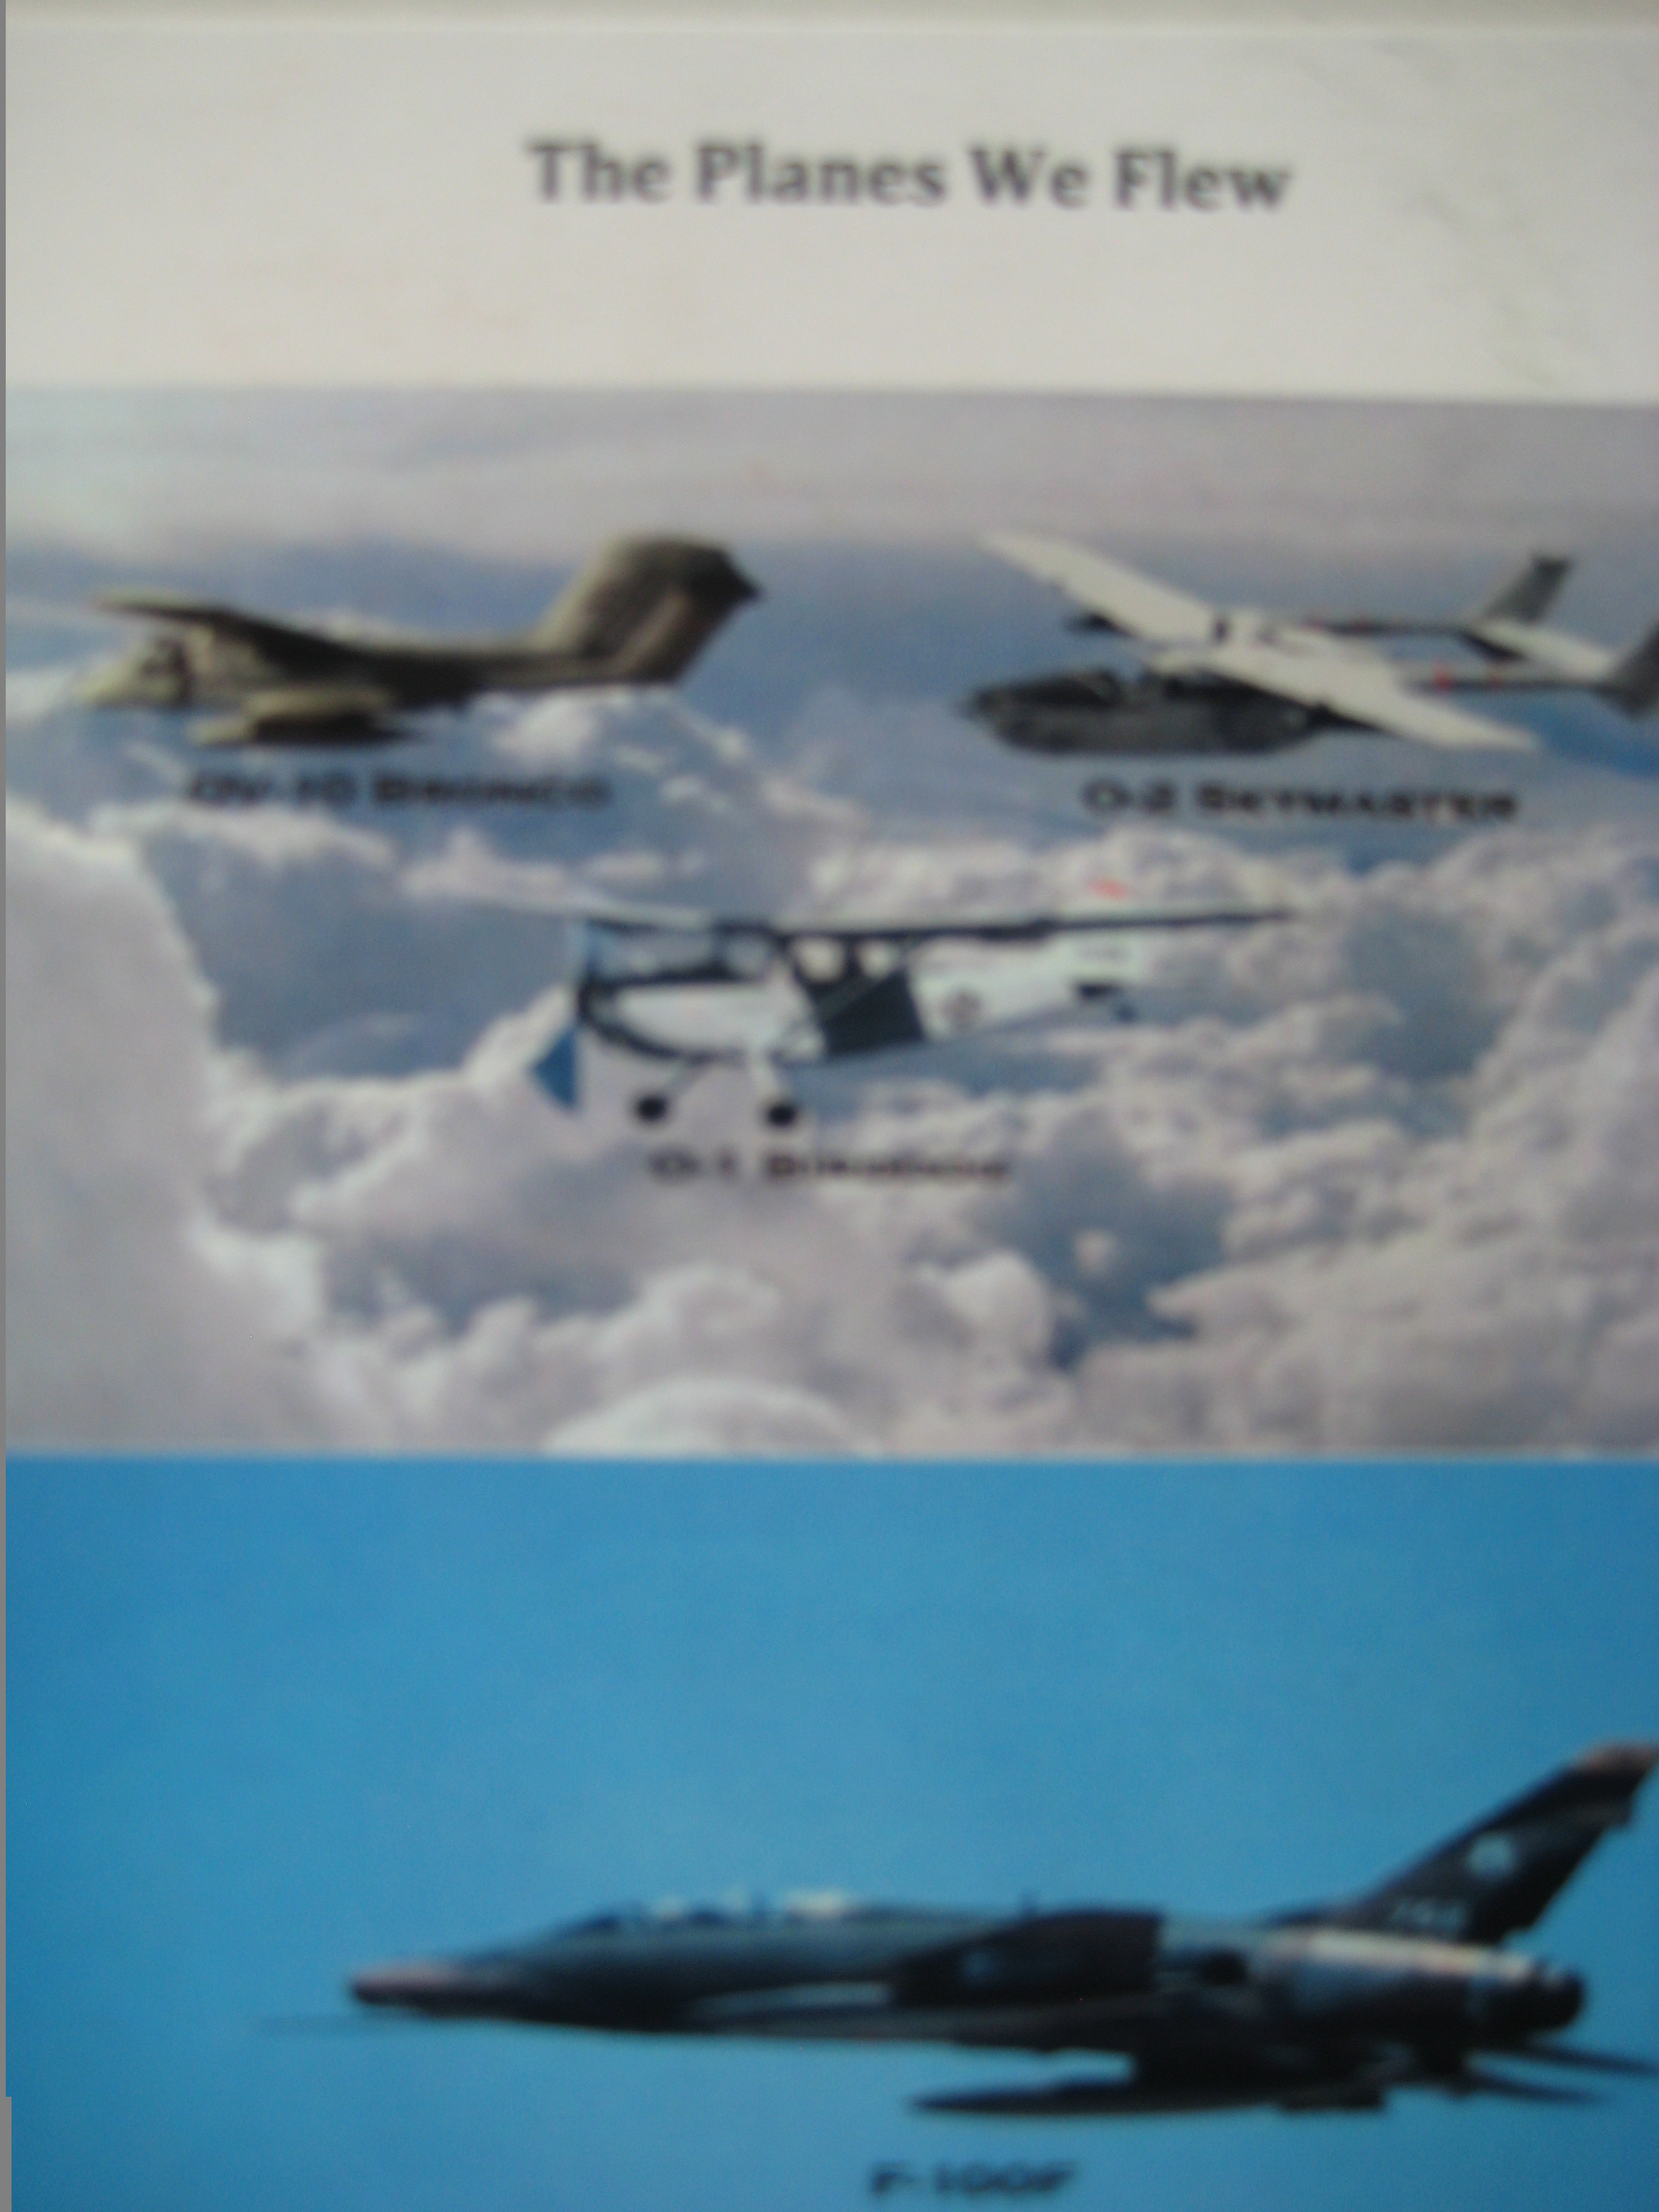 FAC Forward Air Control Aircraft of the Viet Nam War, all flown by the bravest of the brave